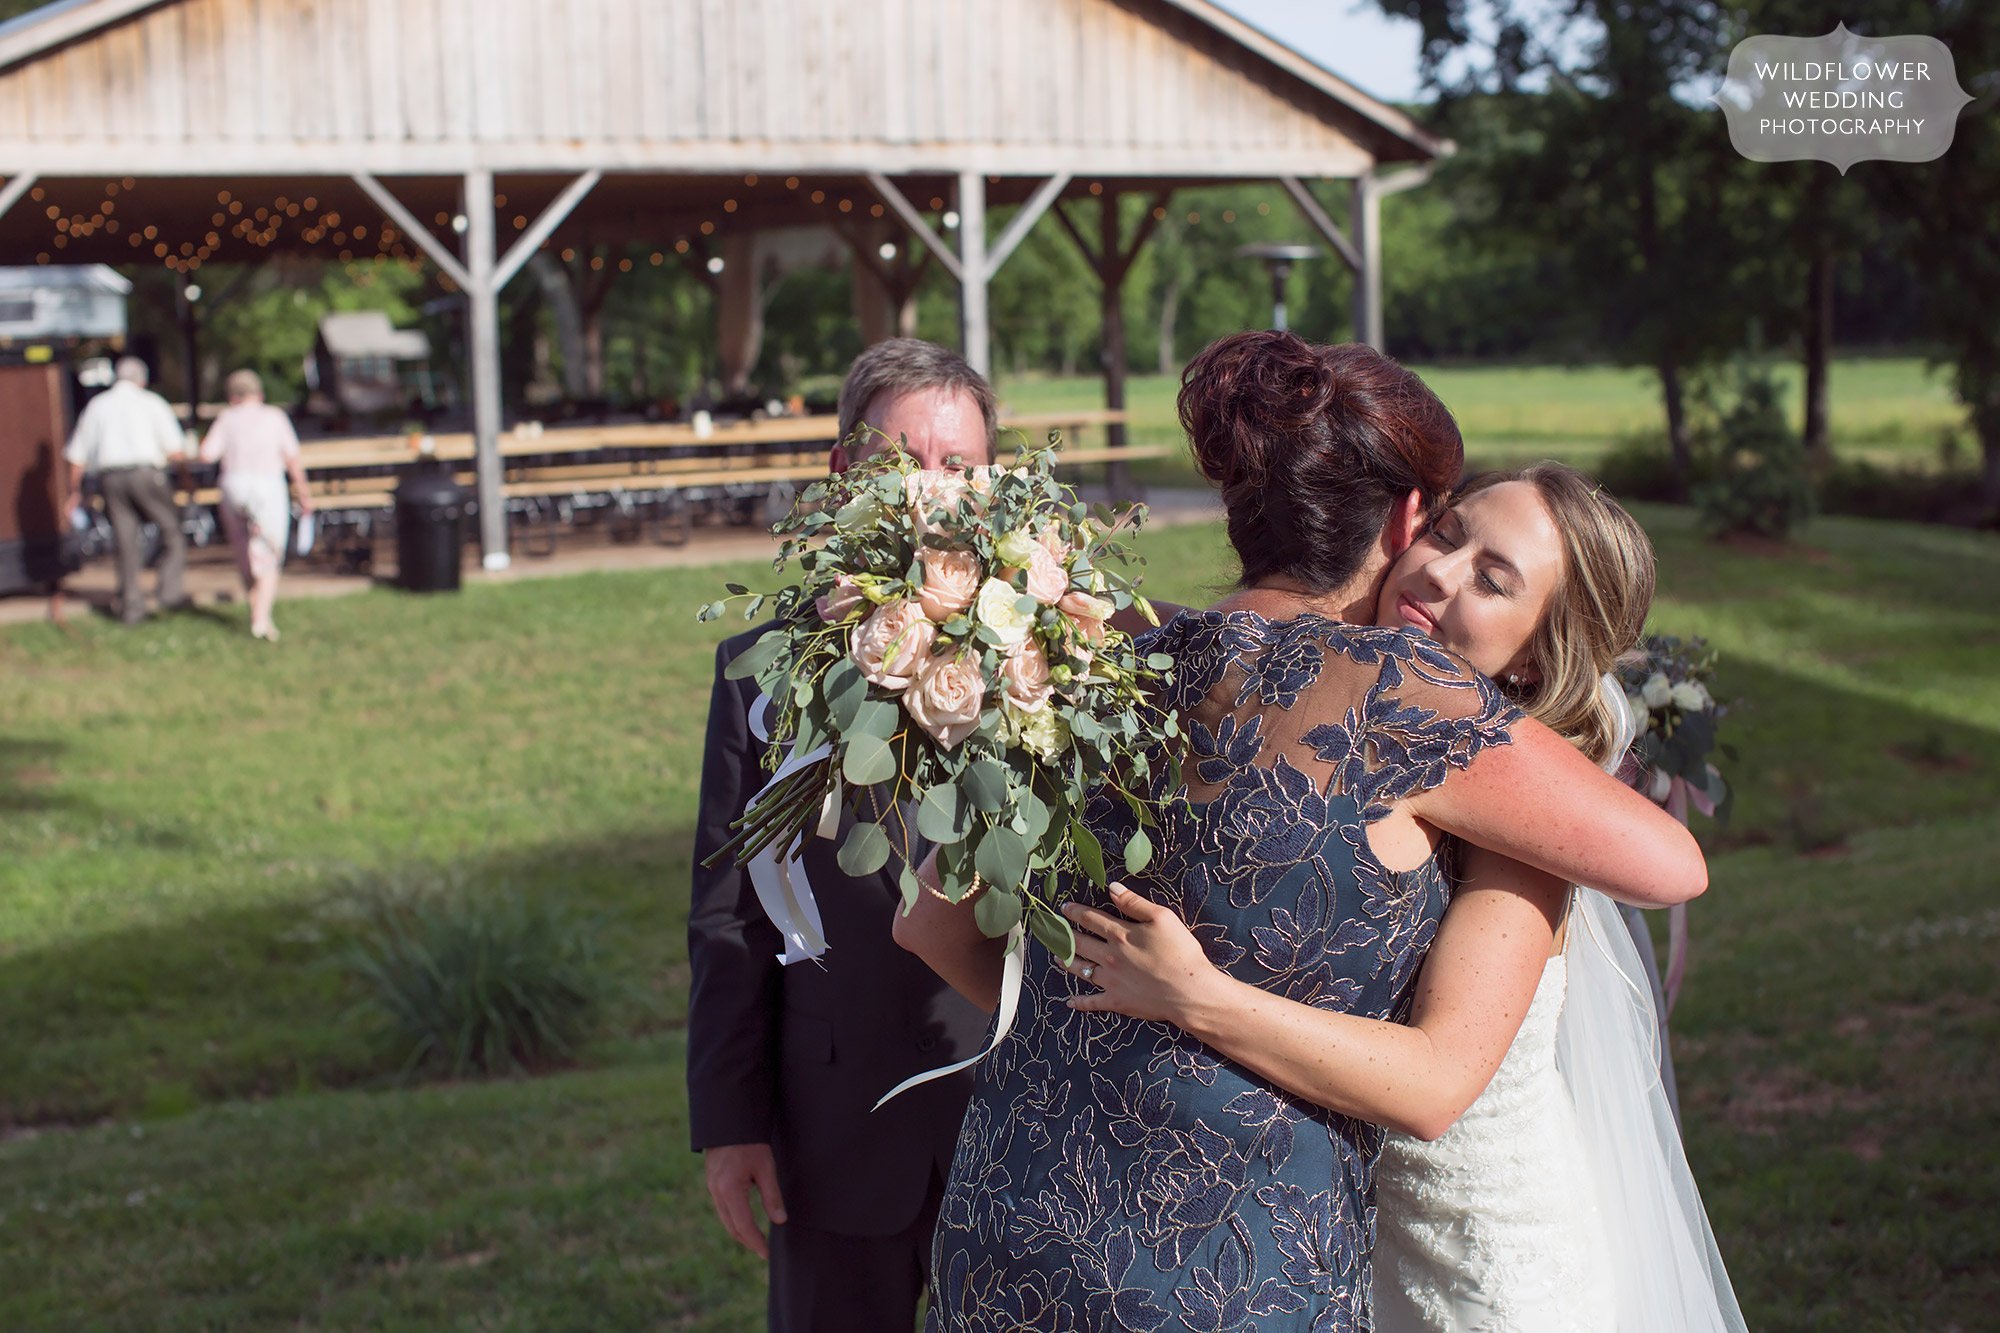 Emotional photo of the bride and her mom hugging after the barn ceremony.